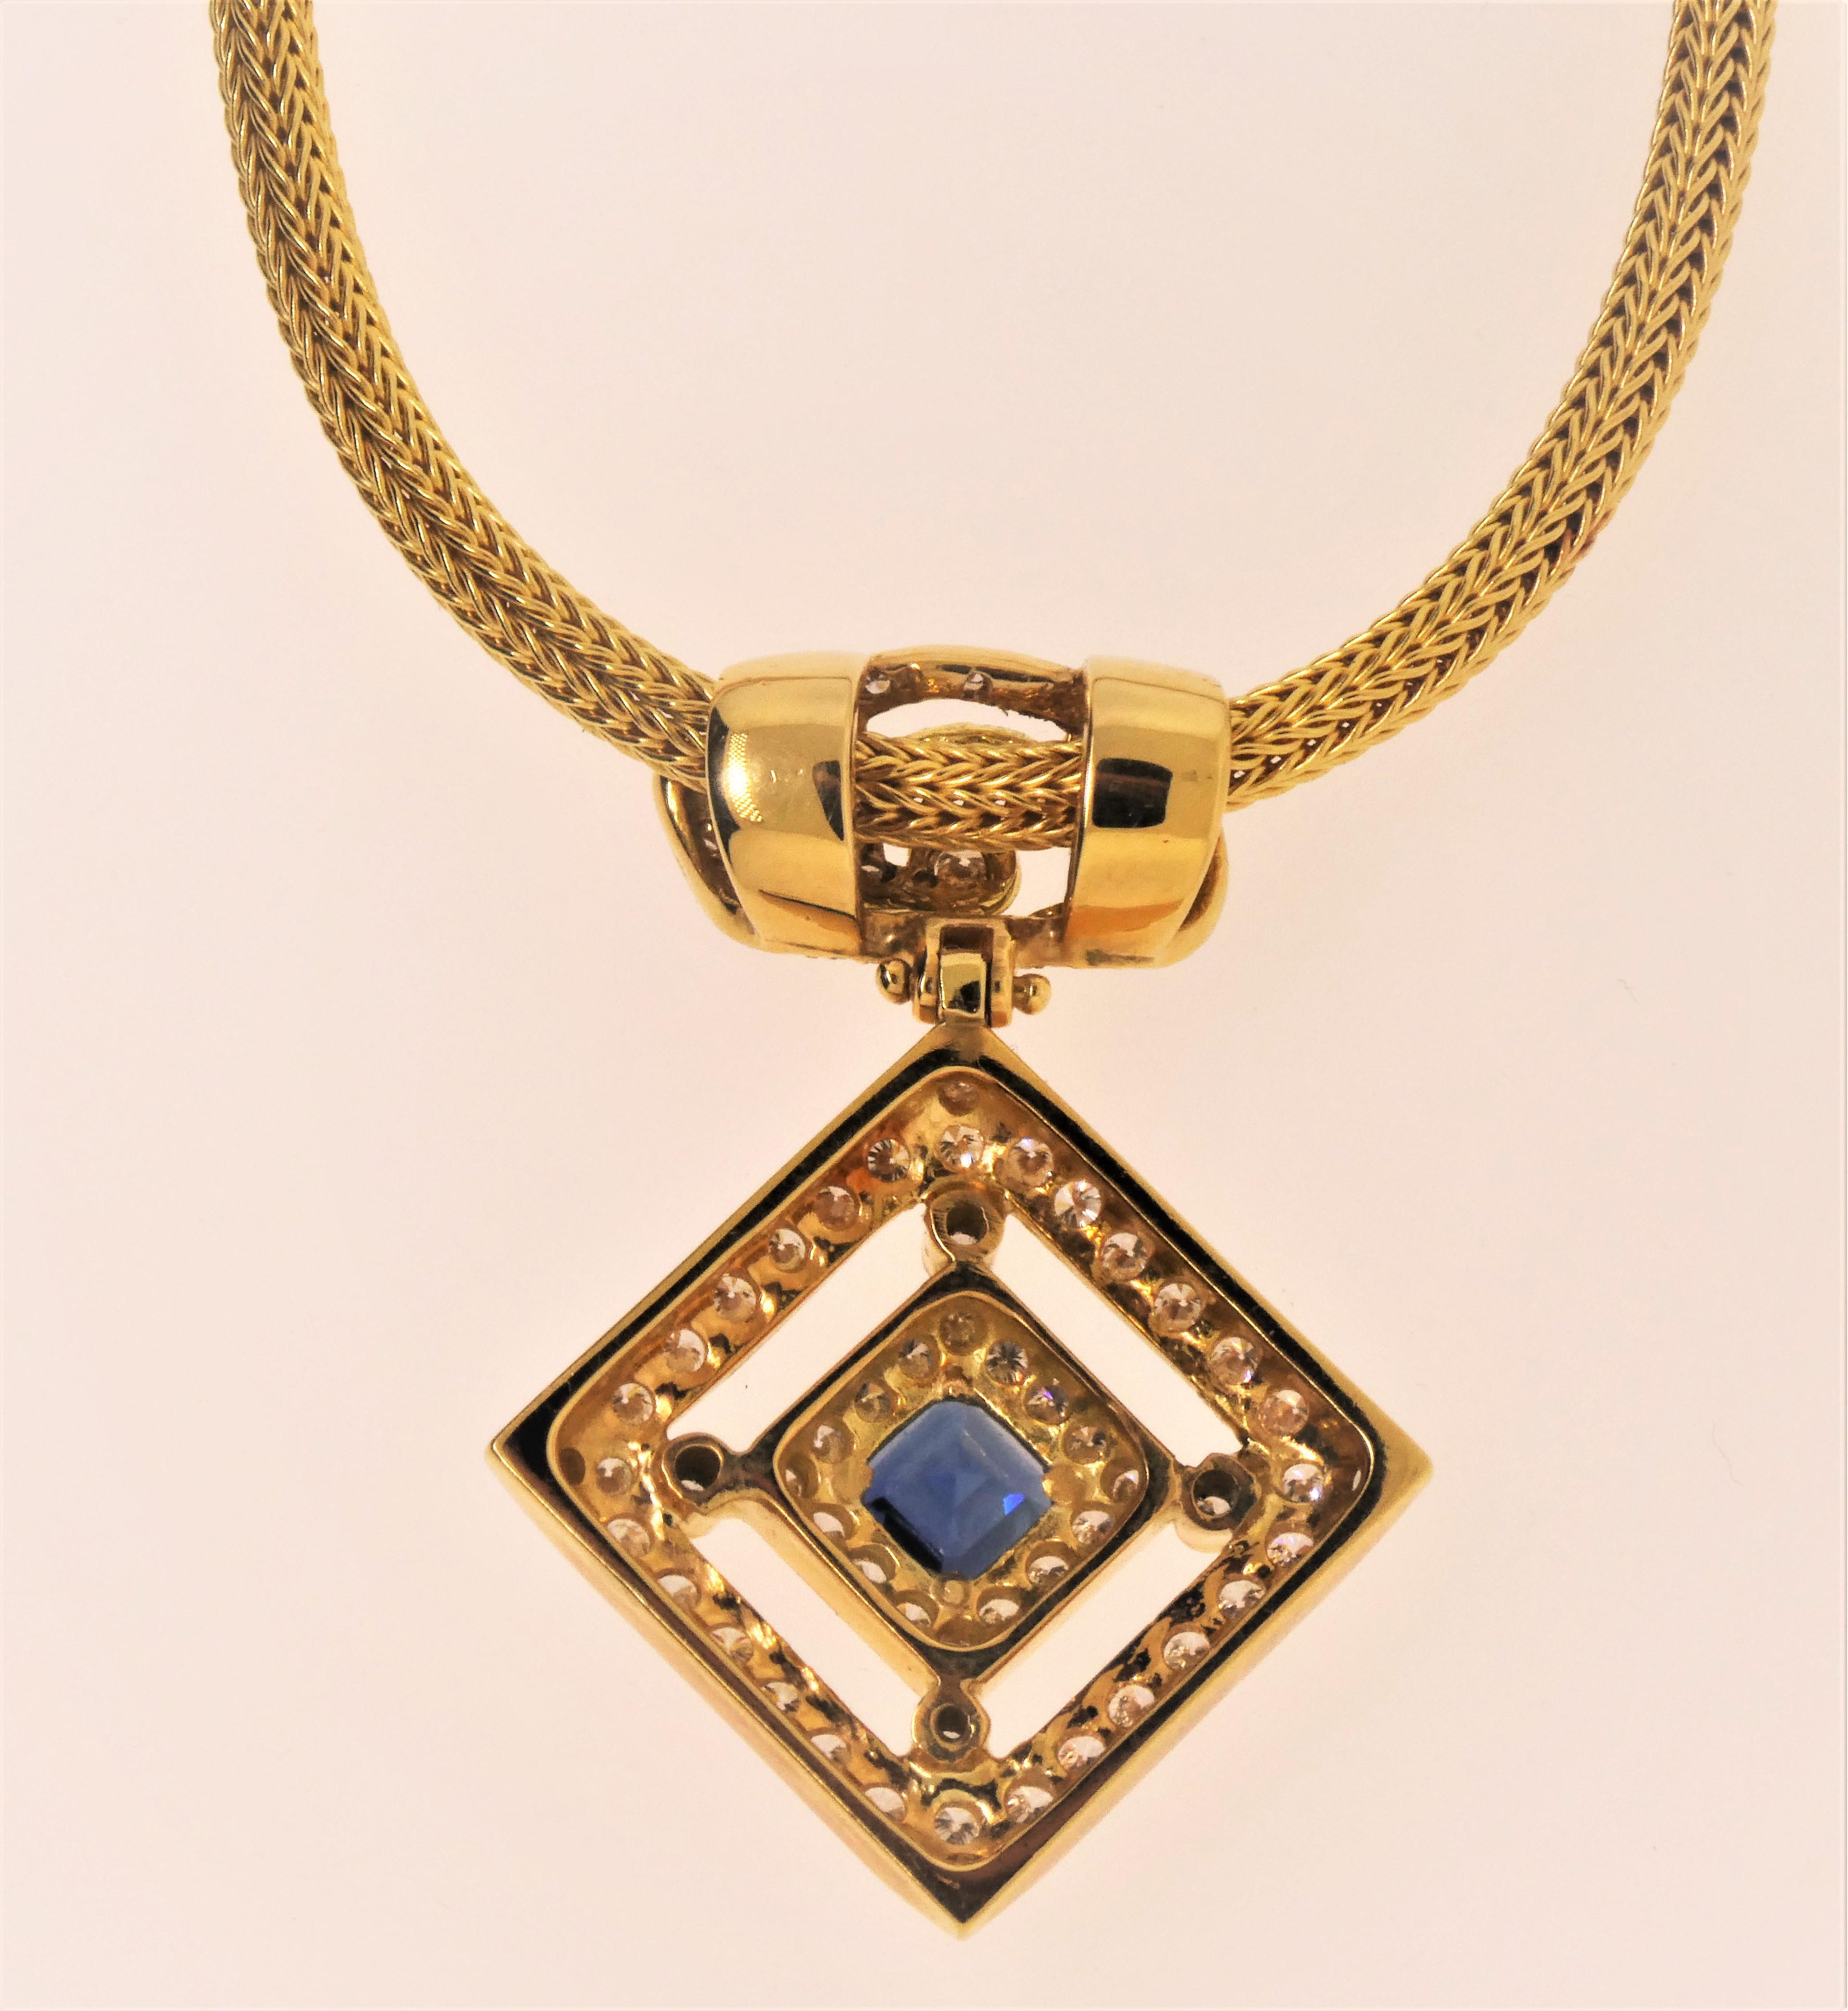 Encased in a beautiful 18 Karat Yellow Gold mounting, Michael Engelhardt has placed a certified 